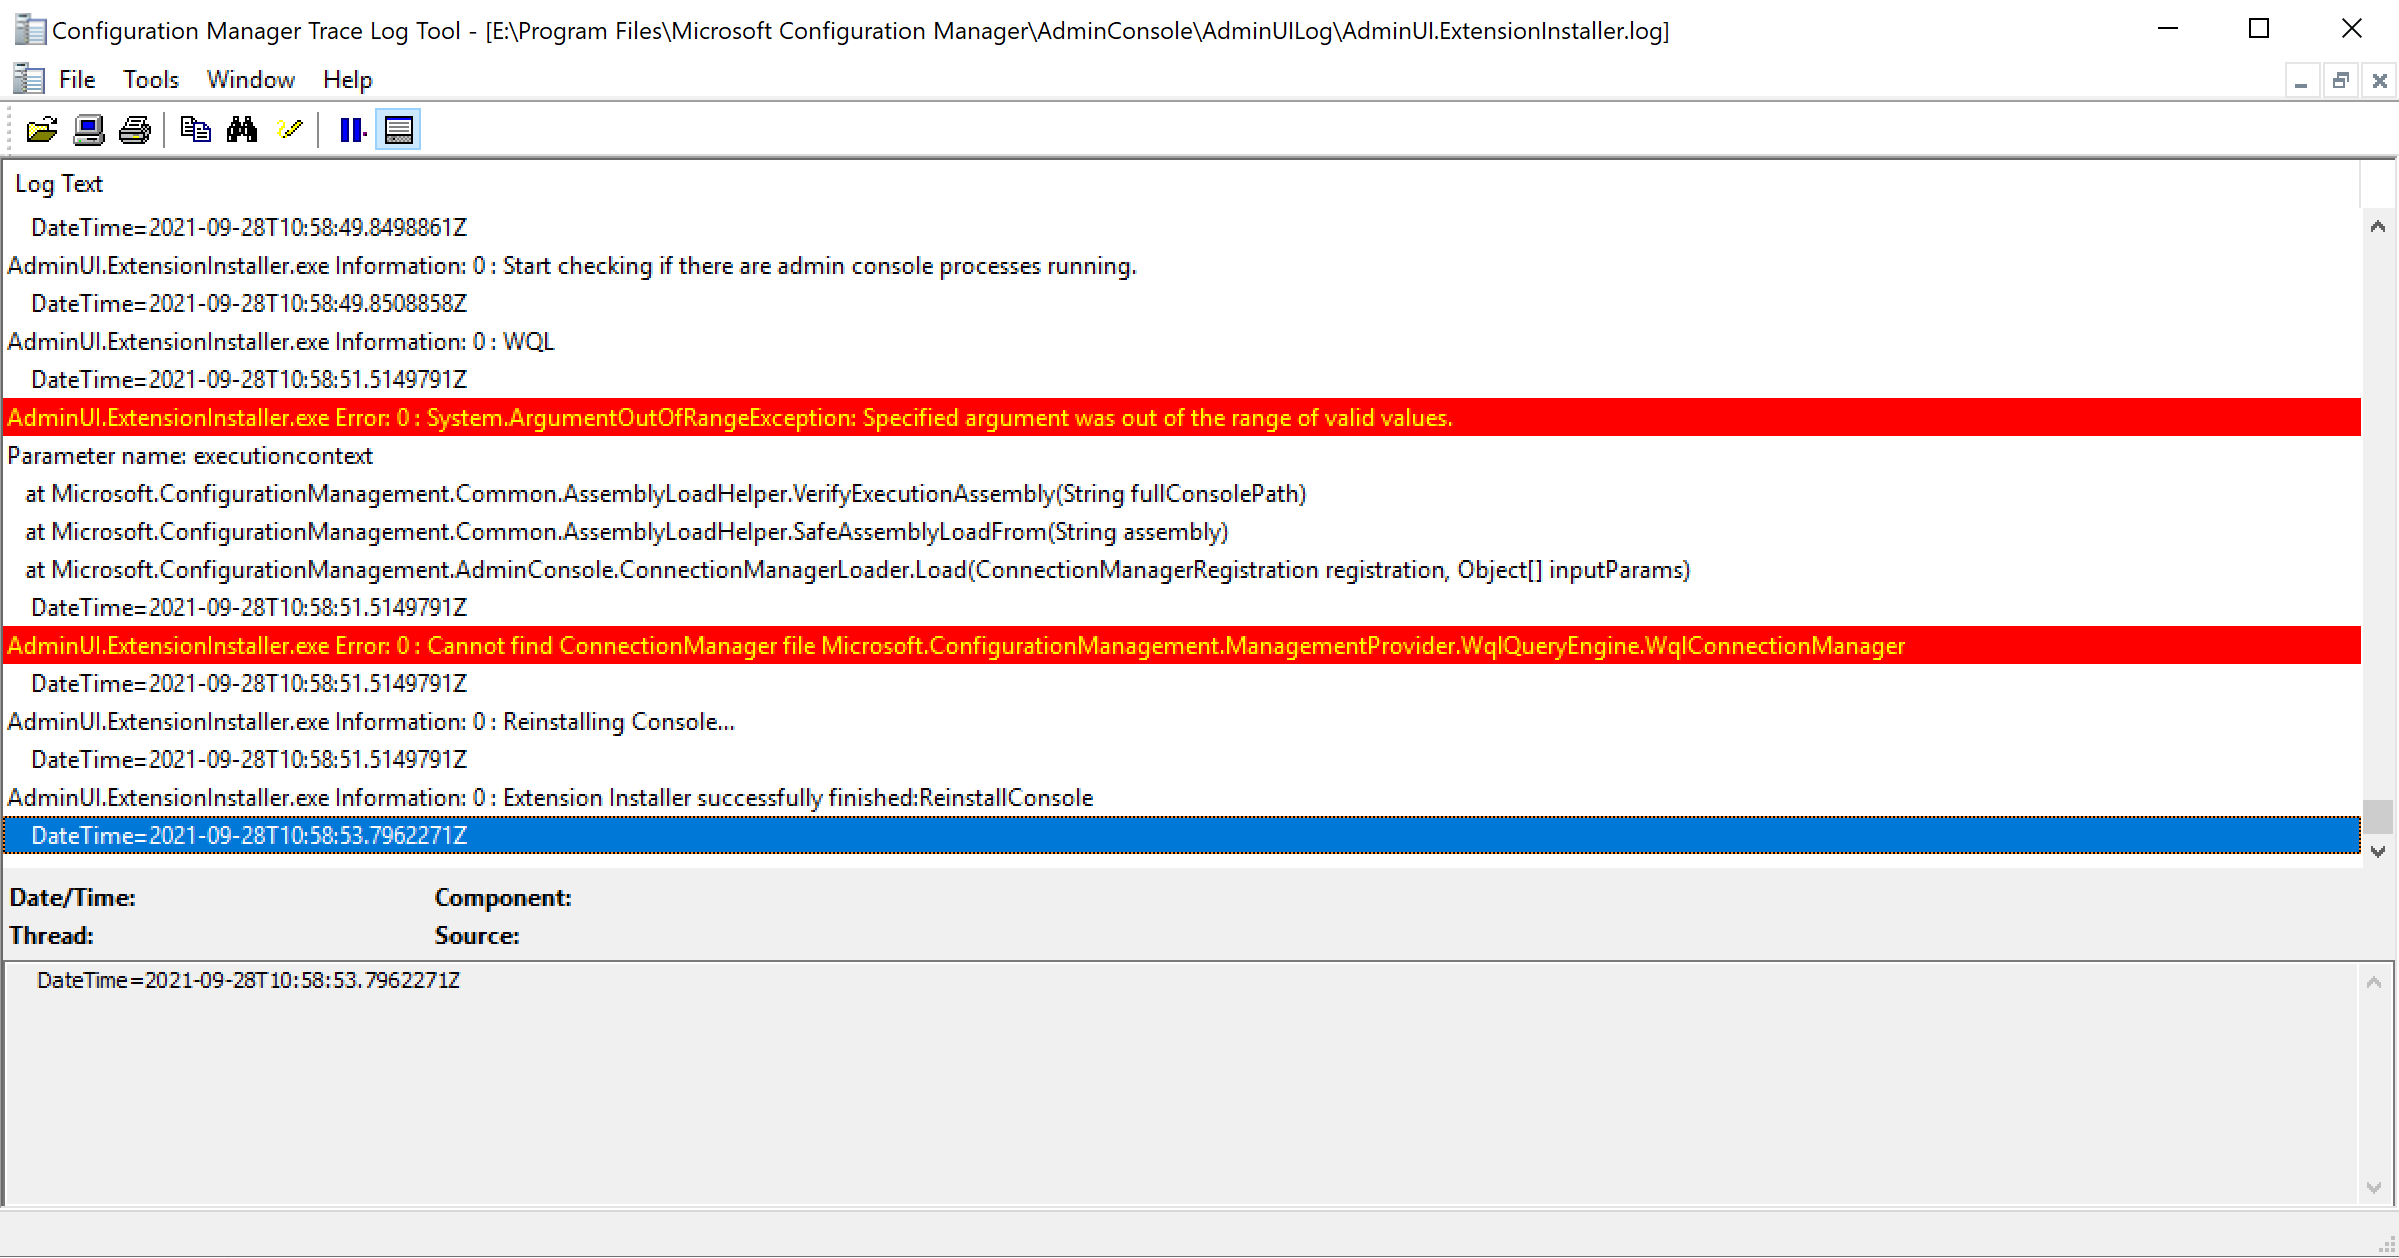  Known Issue ConfigMgr Technical Preview 2109